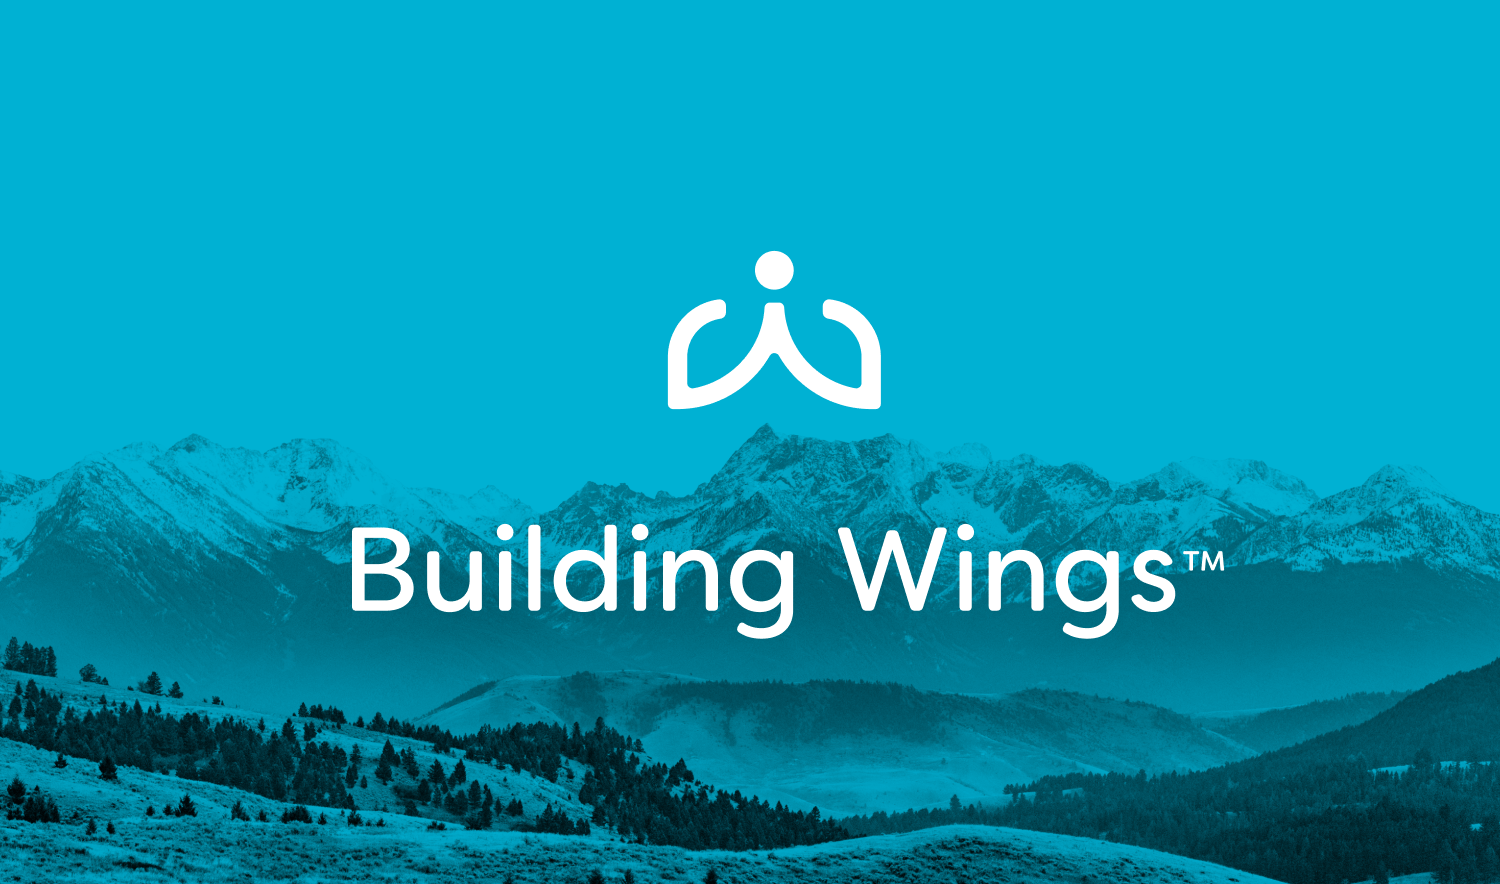 Building Wings Reaches New Heights